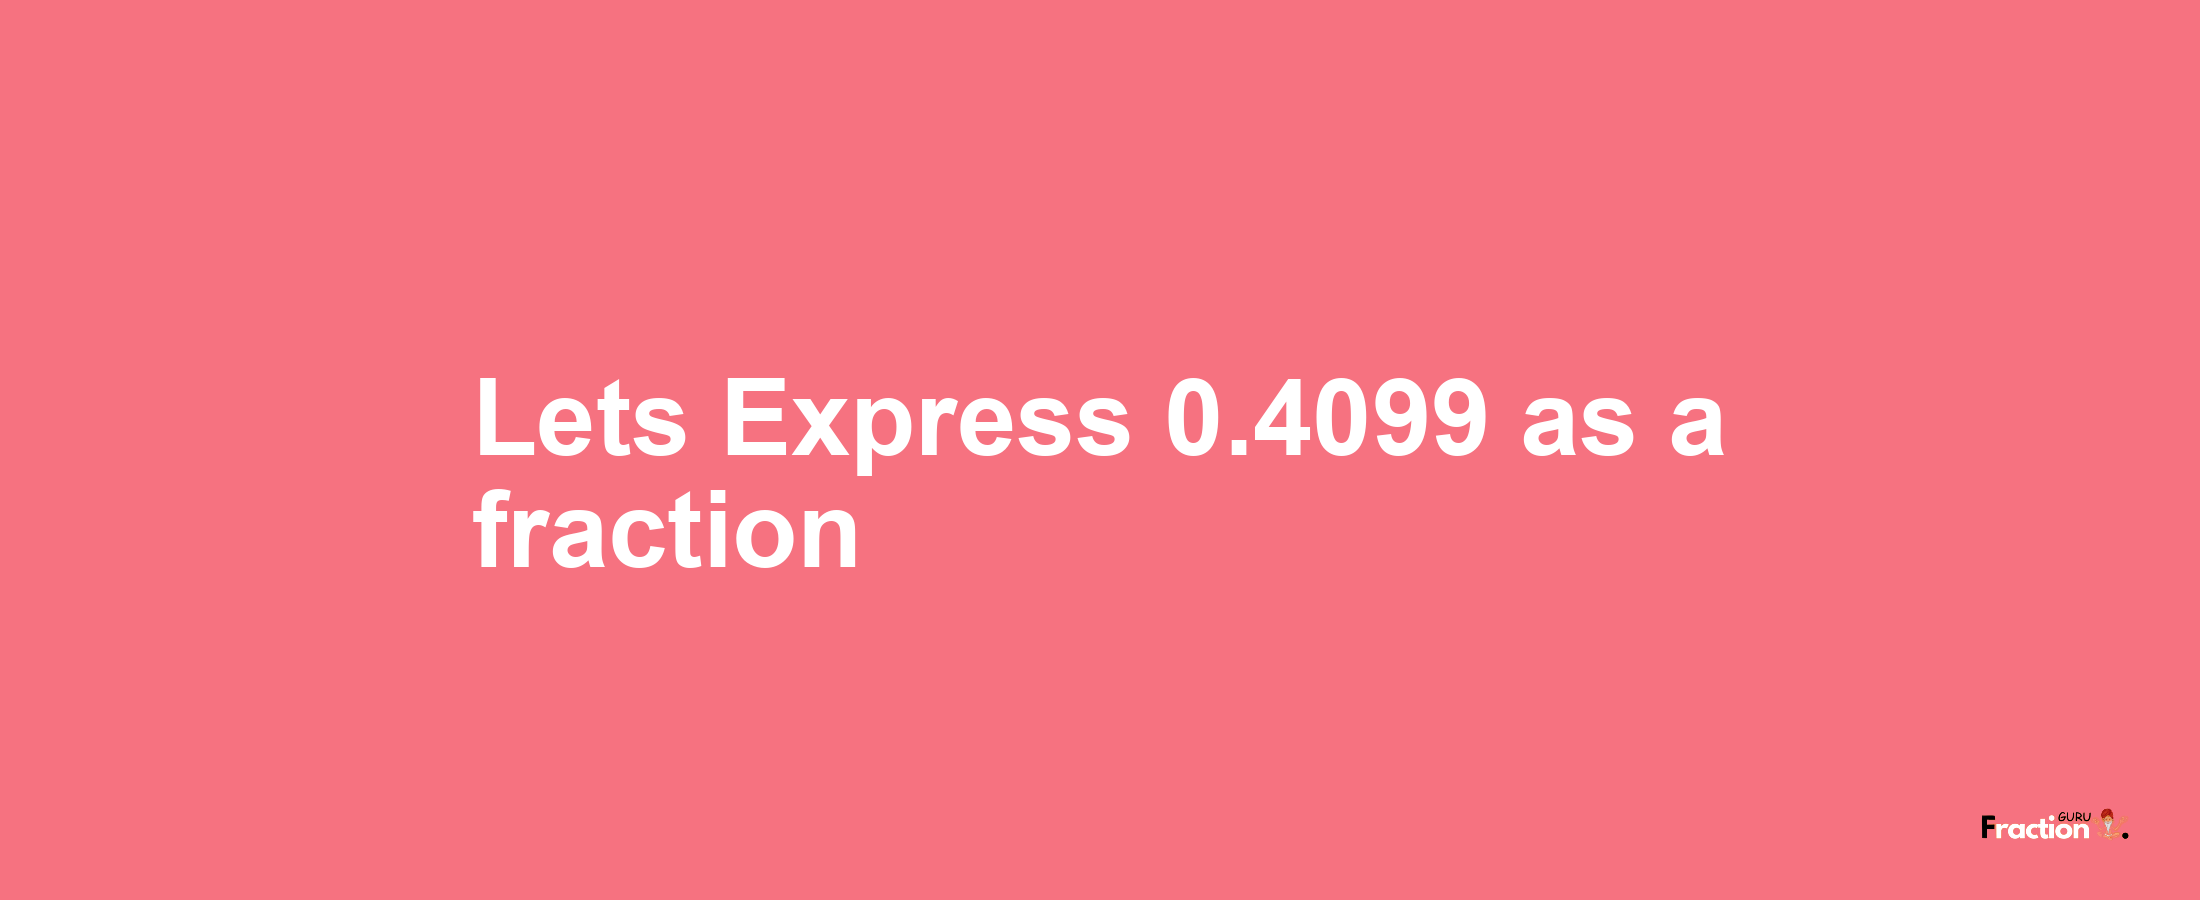 Lets Express 0.4099 as afraction